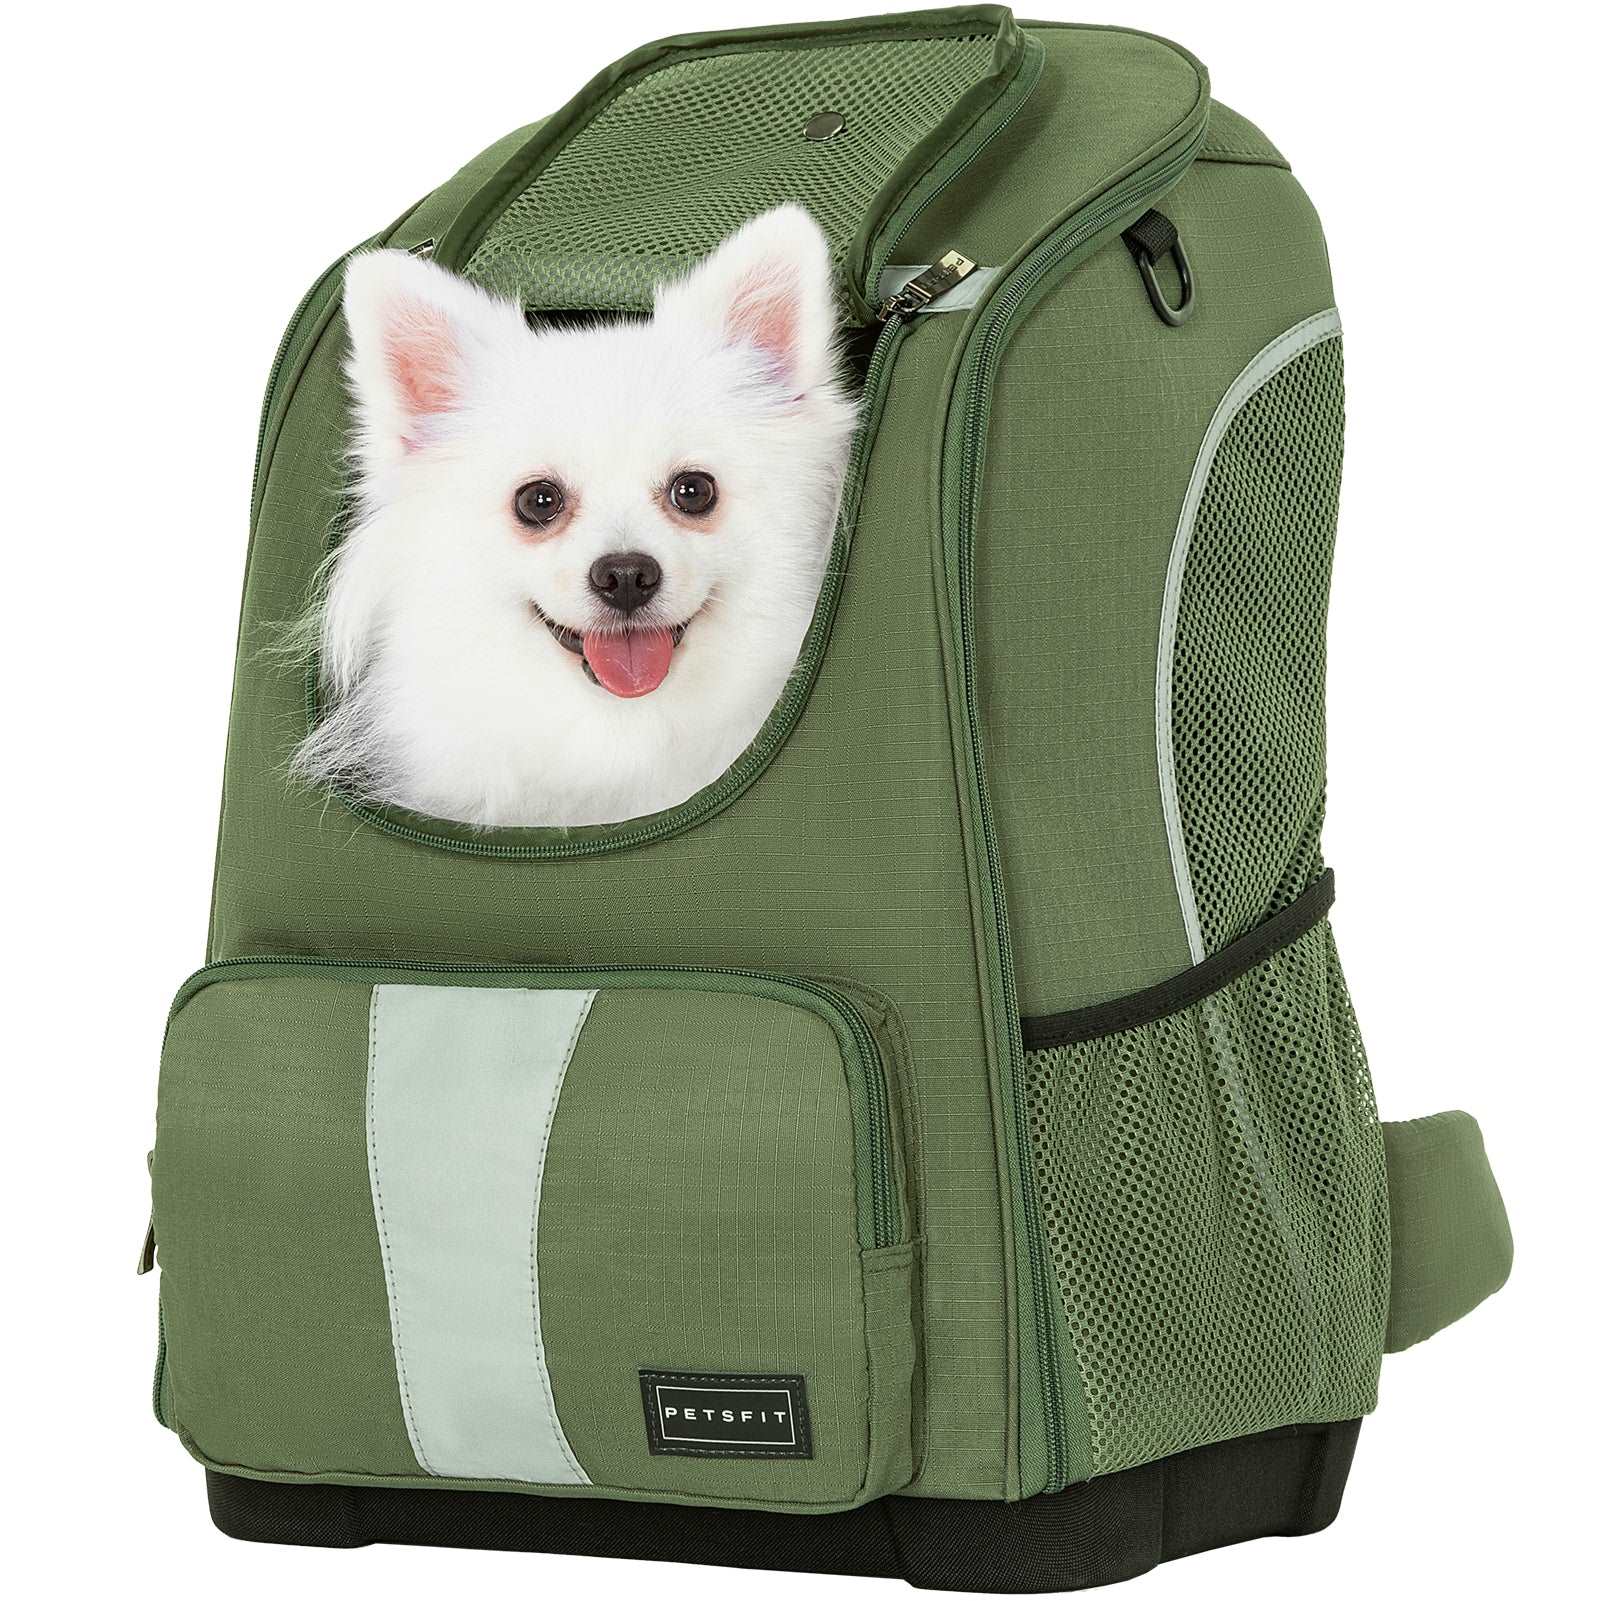 Petsfit-Pet-Carrier-Dog-Backpack-with-Upgraded-Weight-Reduction-Design-09